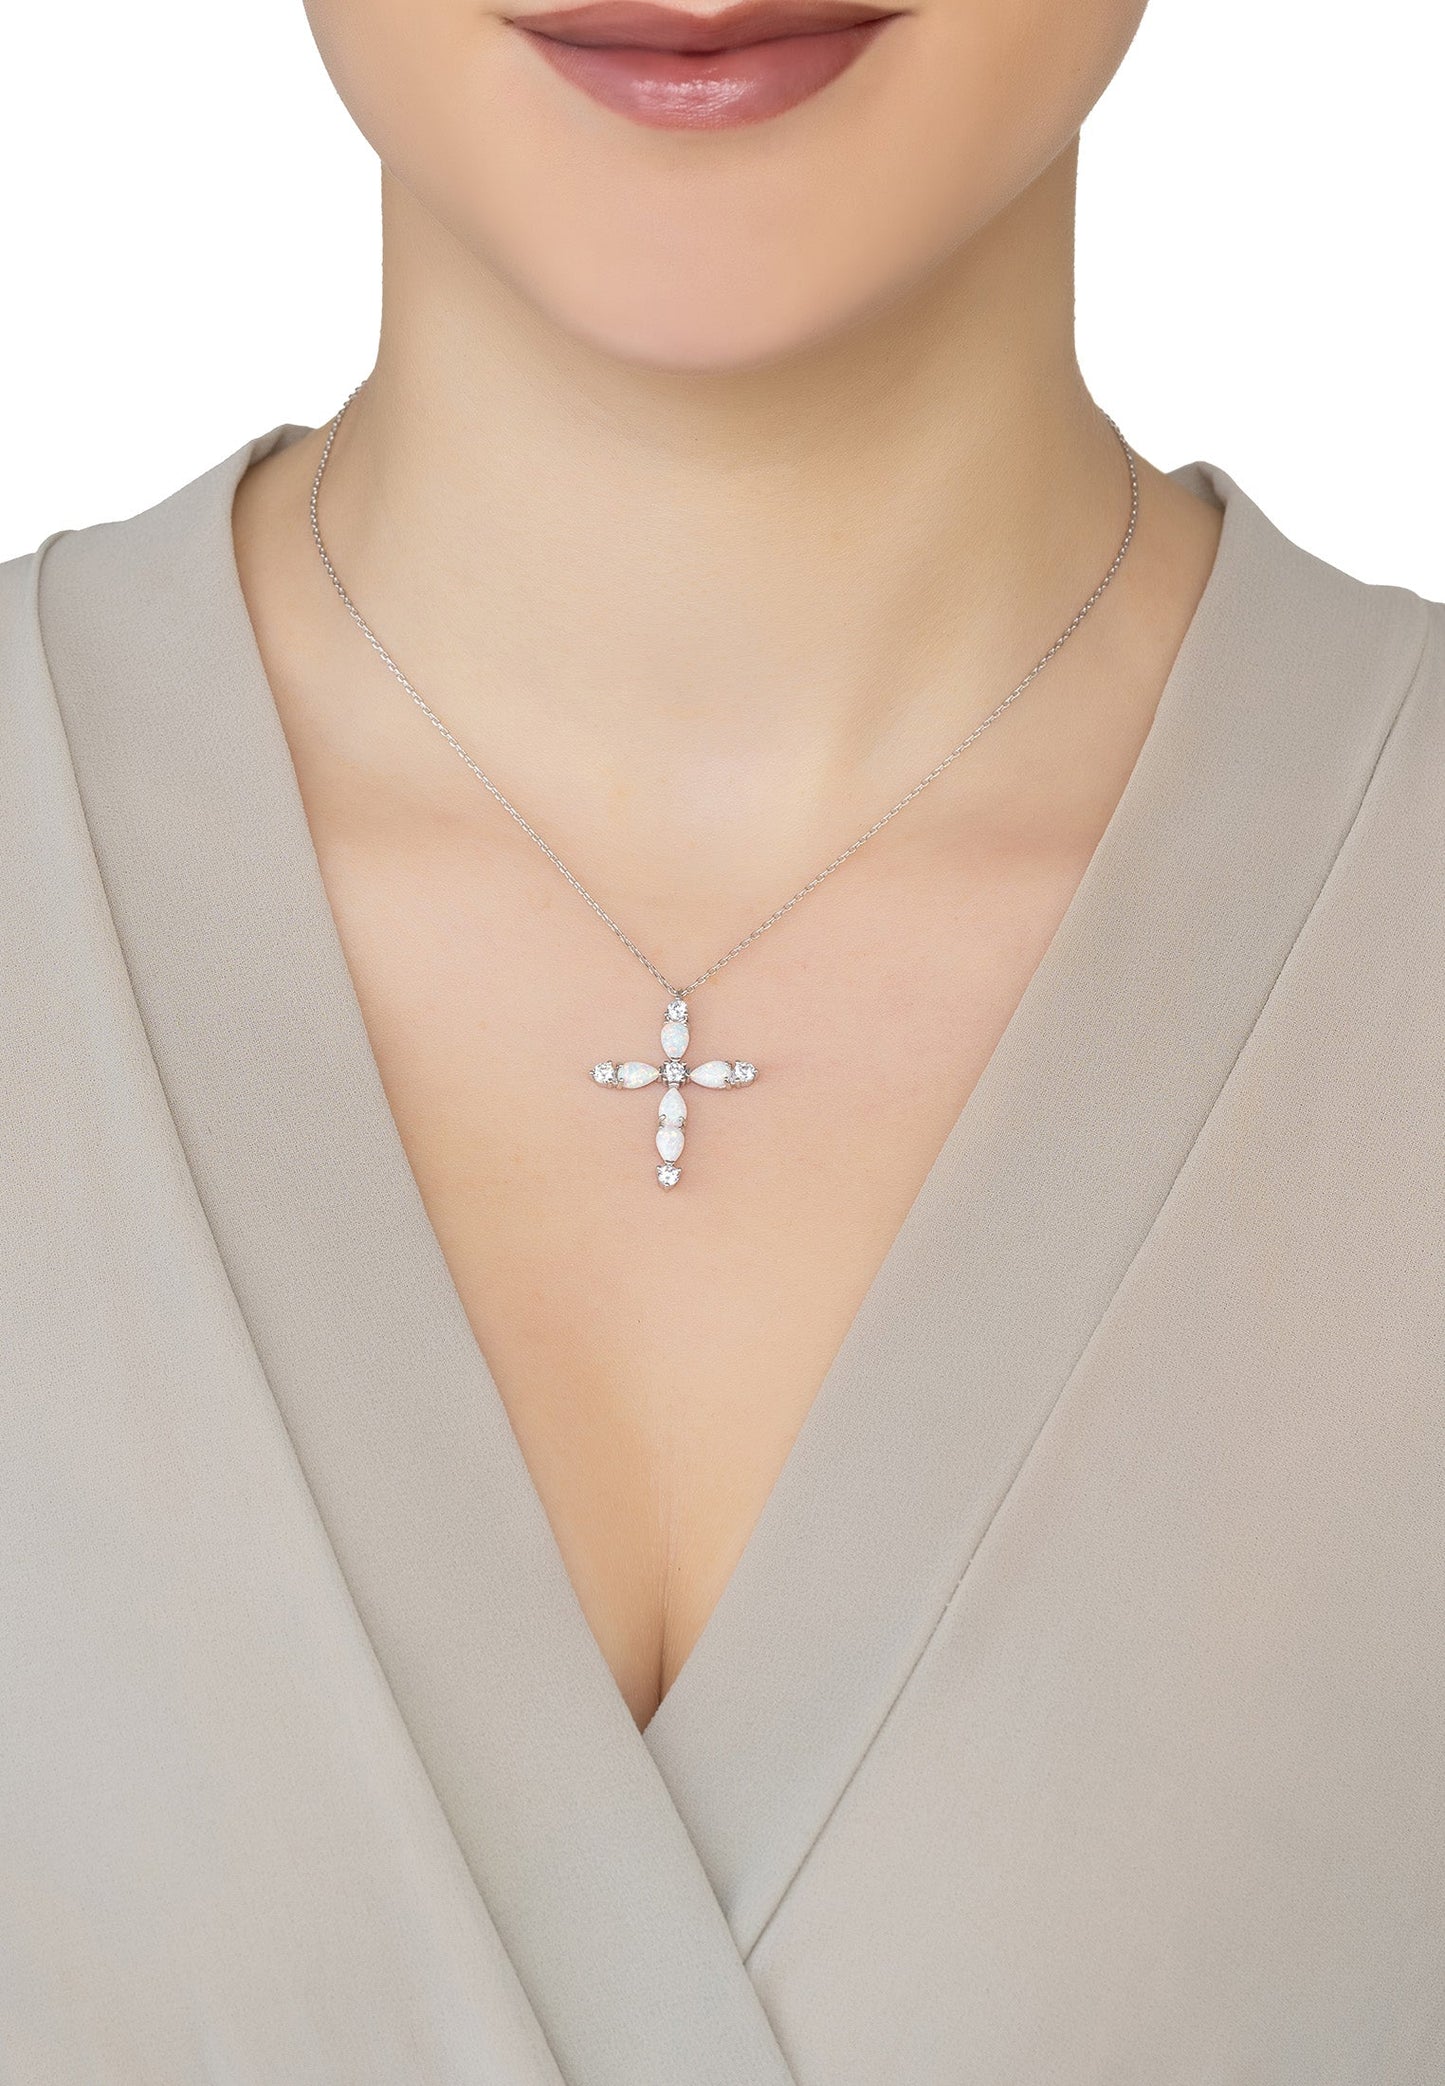 Opal and Sparkle Cross Pendant Necklace Silver - Timeless Faith and Modern Radiance - Desire & Hope